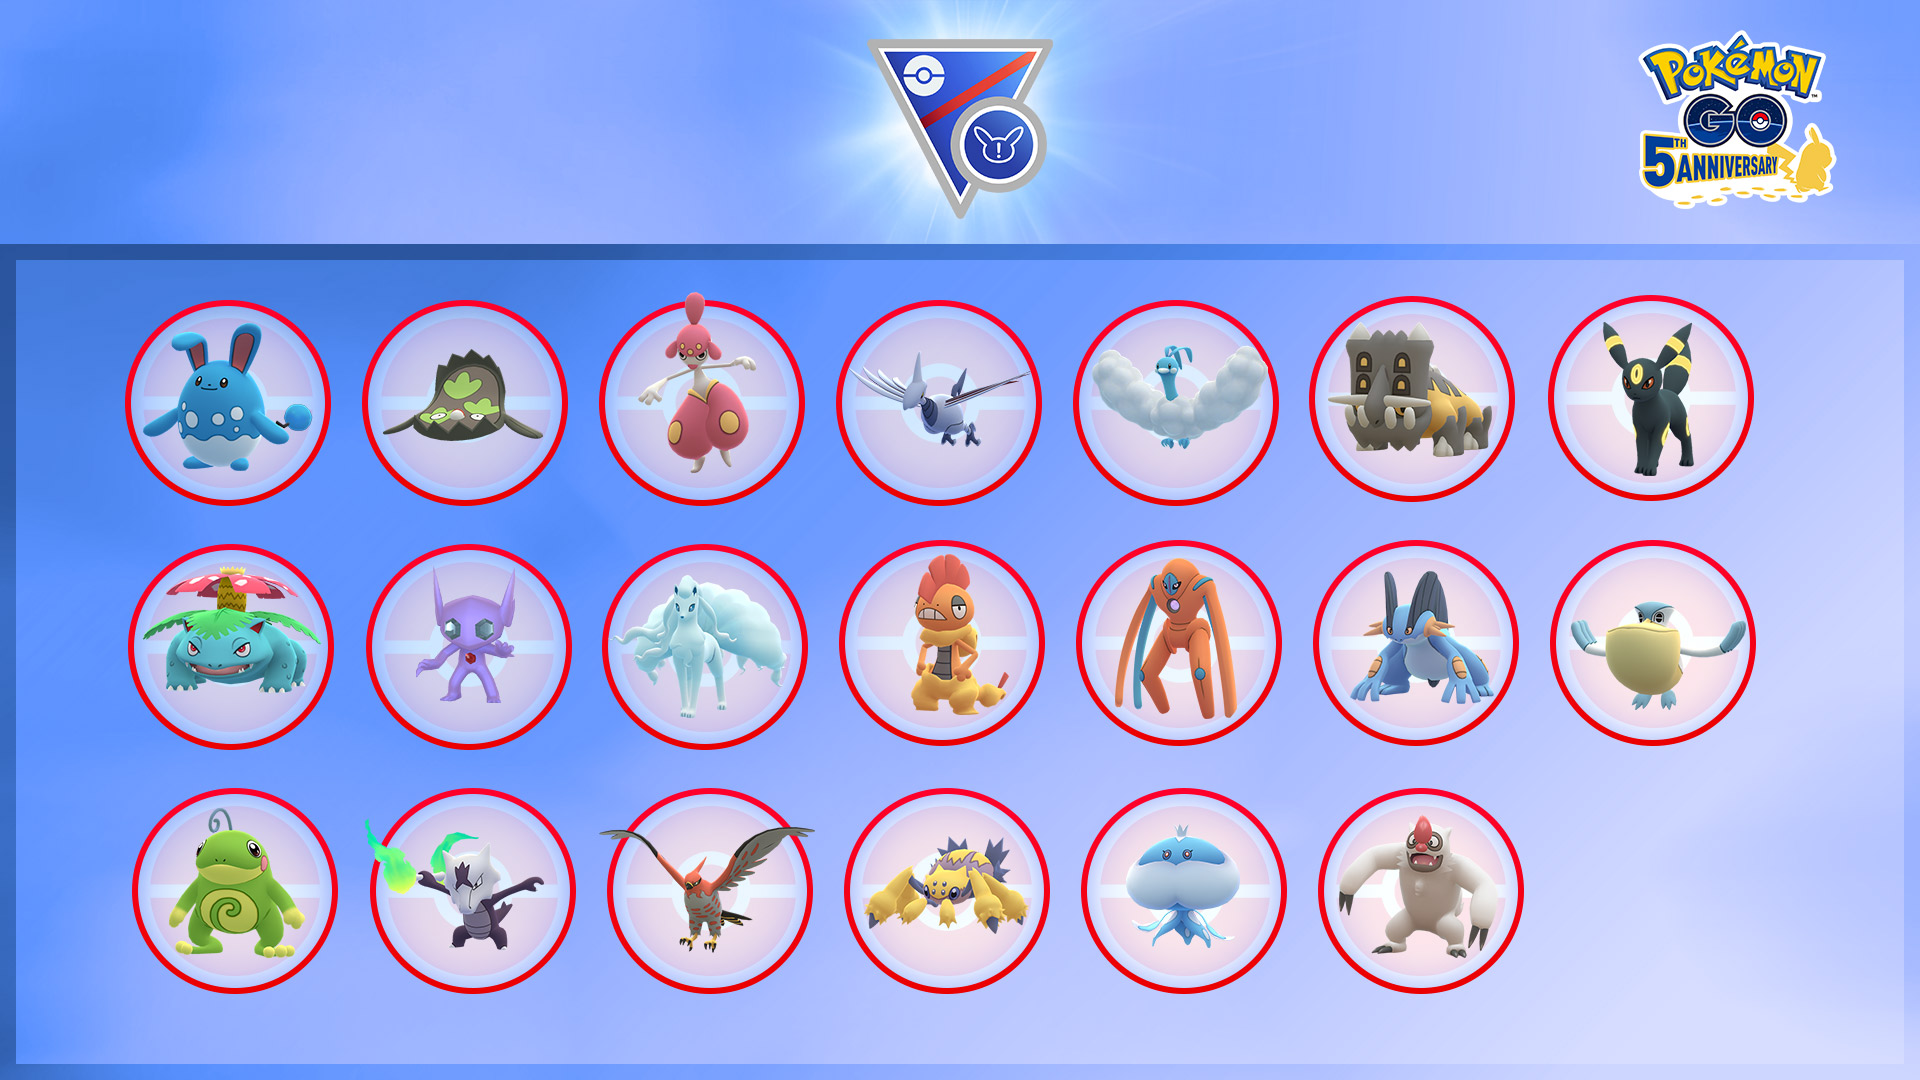 Pokemon Go Are You Prepared For The Great League Remix Review The List Of Ineligible Pokemon To See What You Ll Need To Prepare For Gobattle T Co 1vg8qvxqs2 Twitter